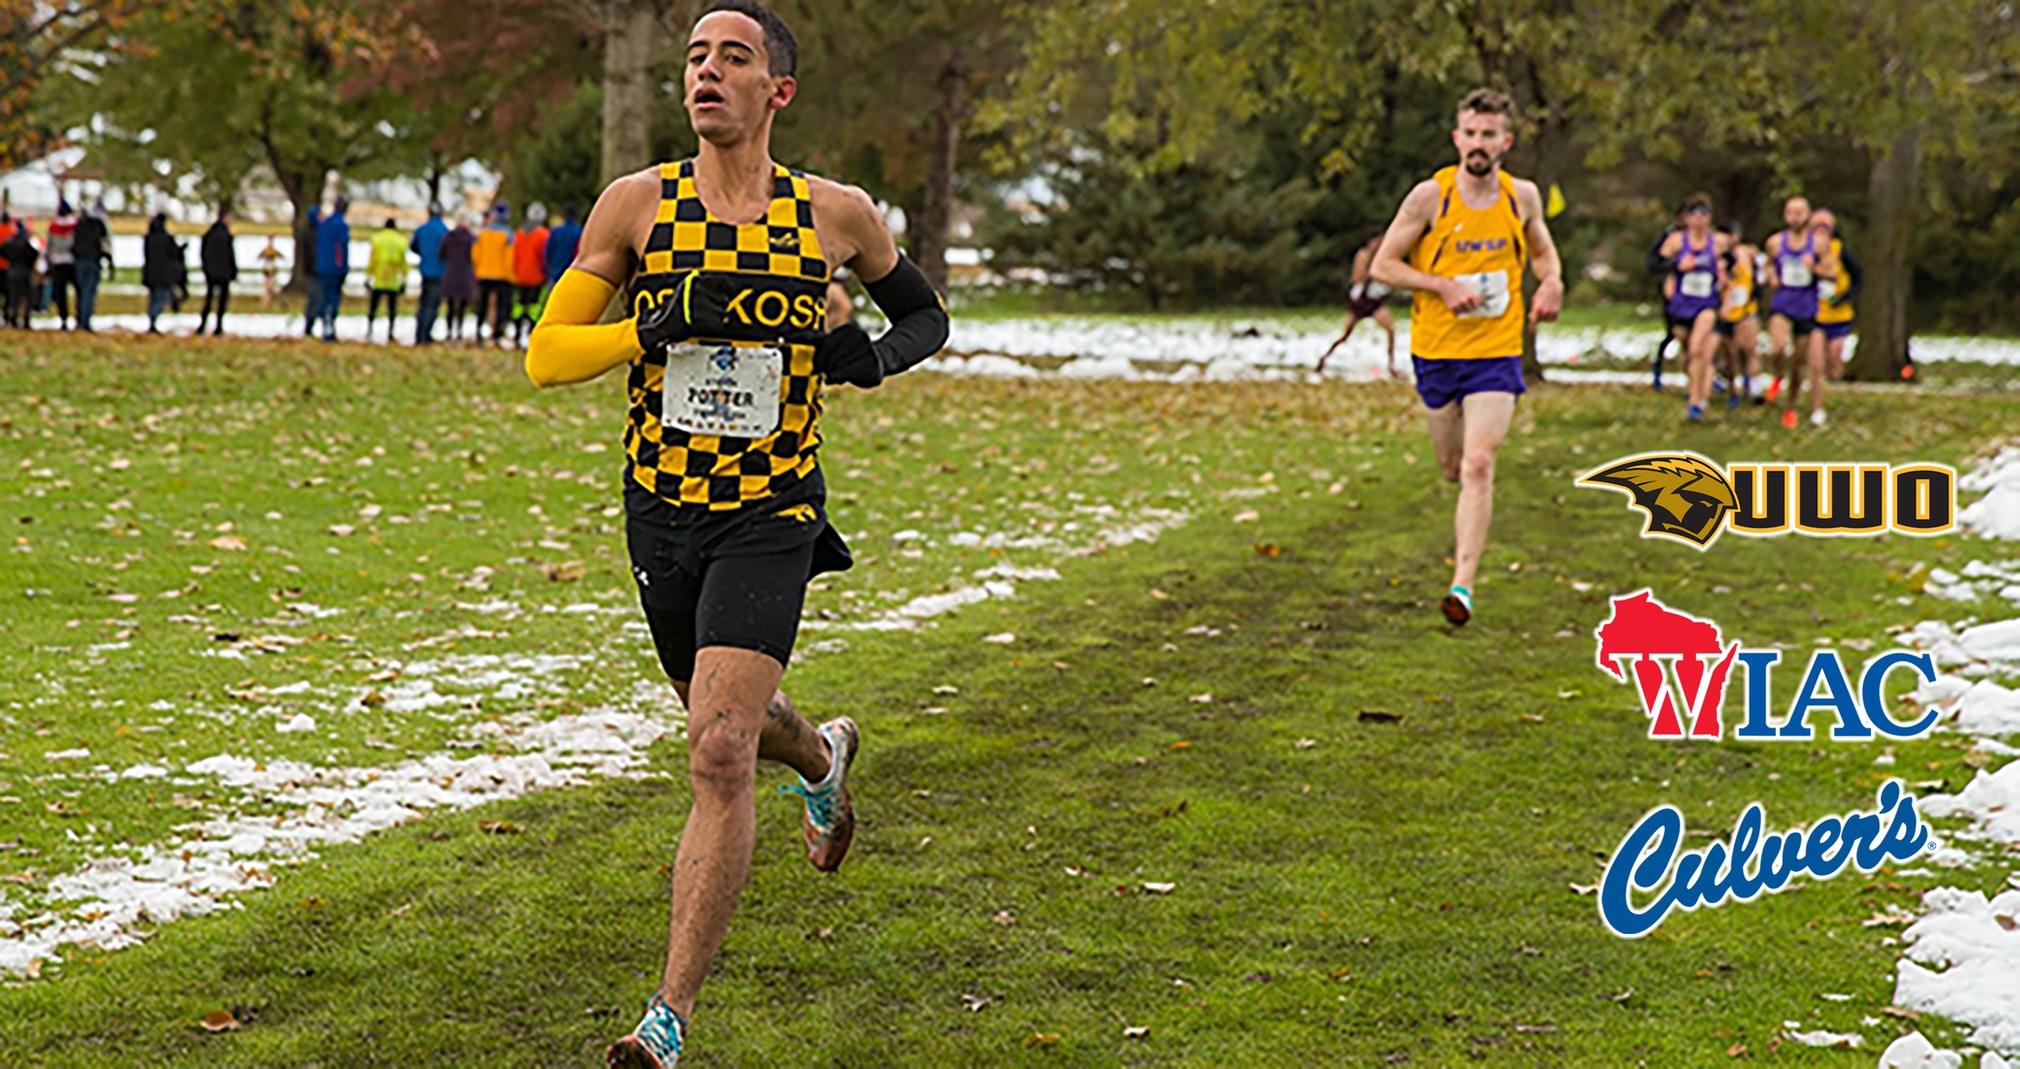 Steven Potter finished 13th for the Titans at the 2019 WIAC Cross Country Championship.